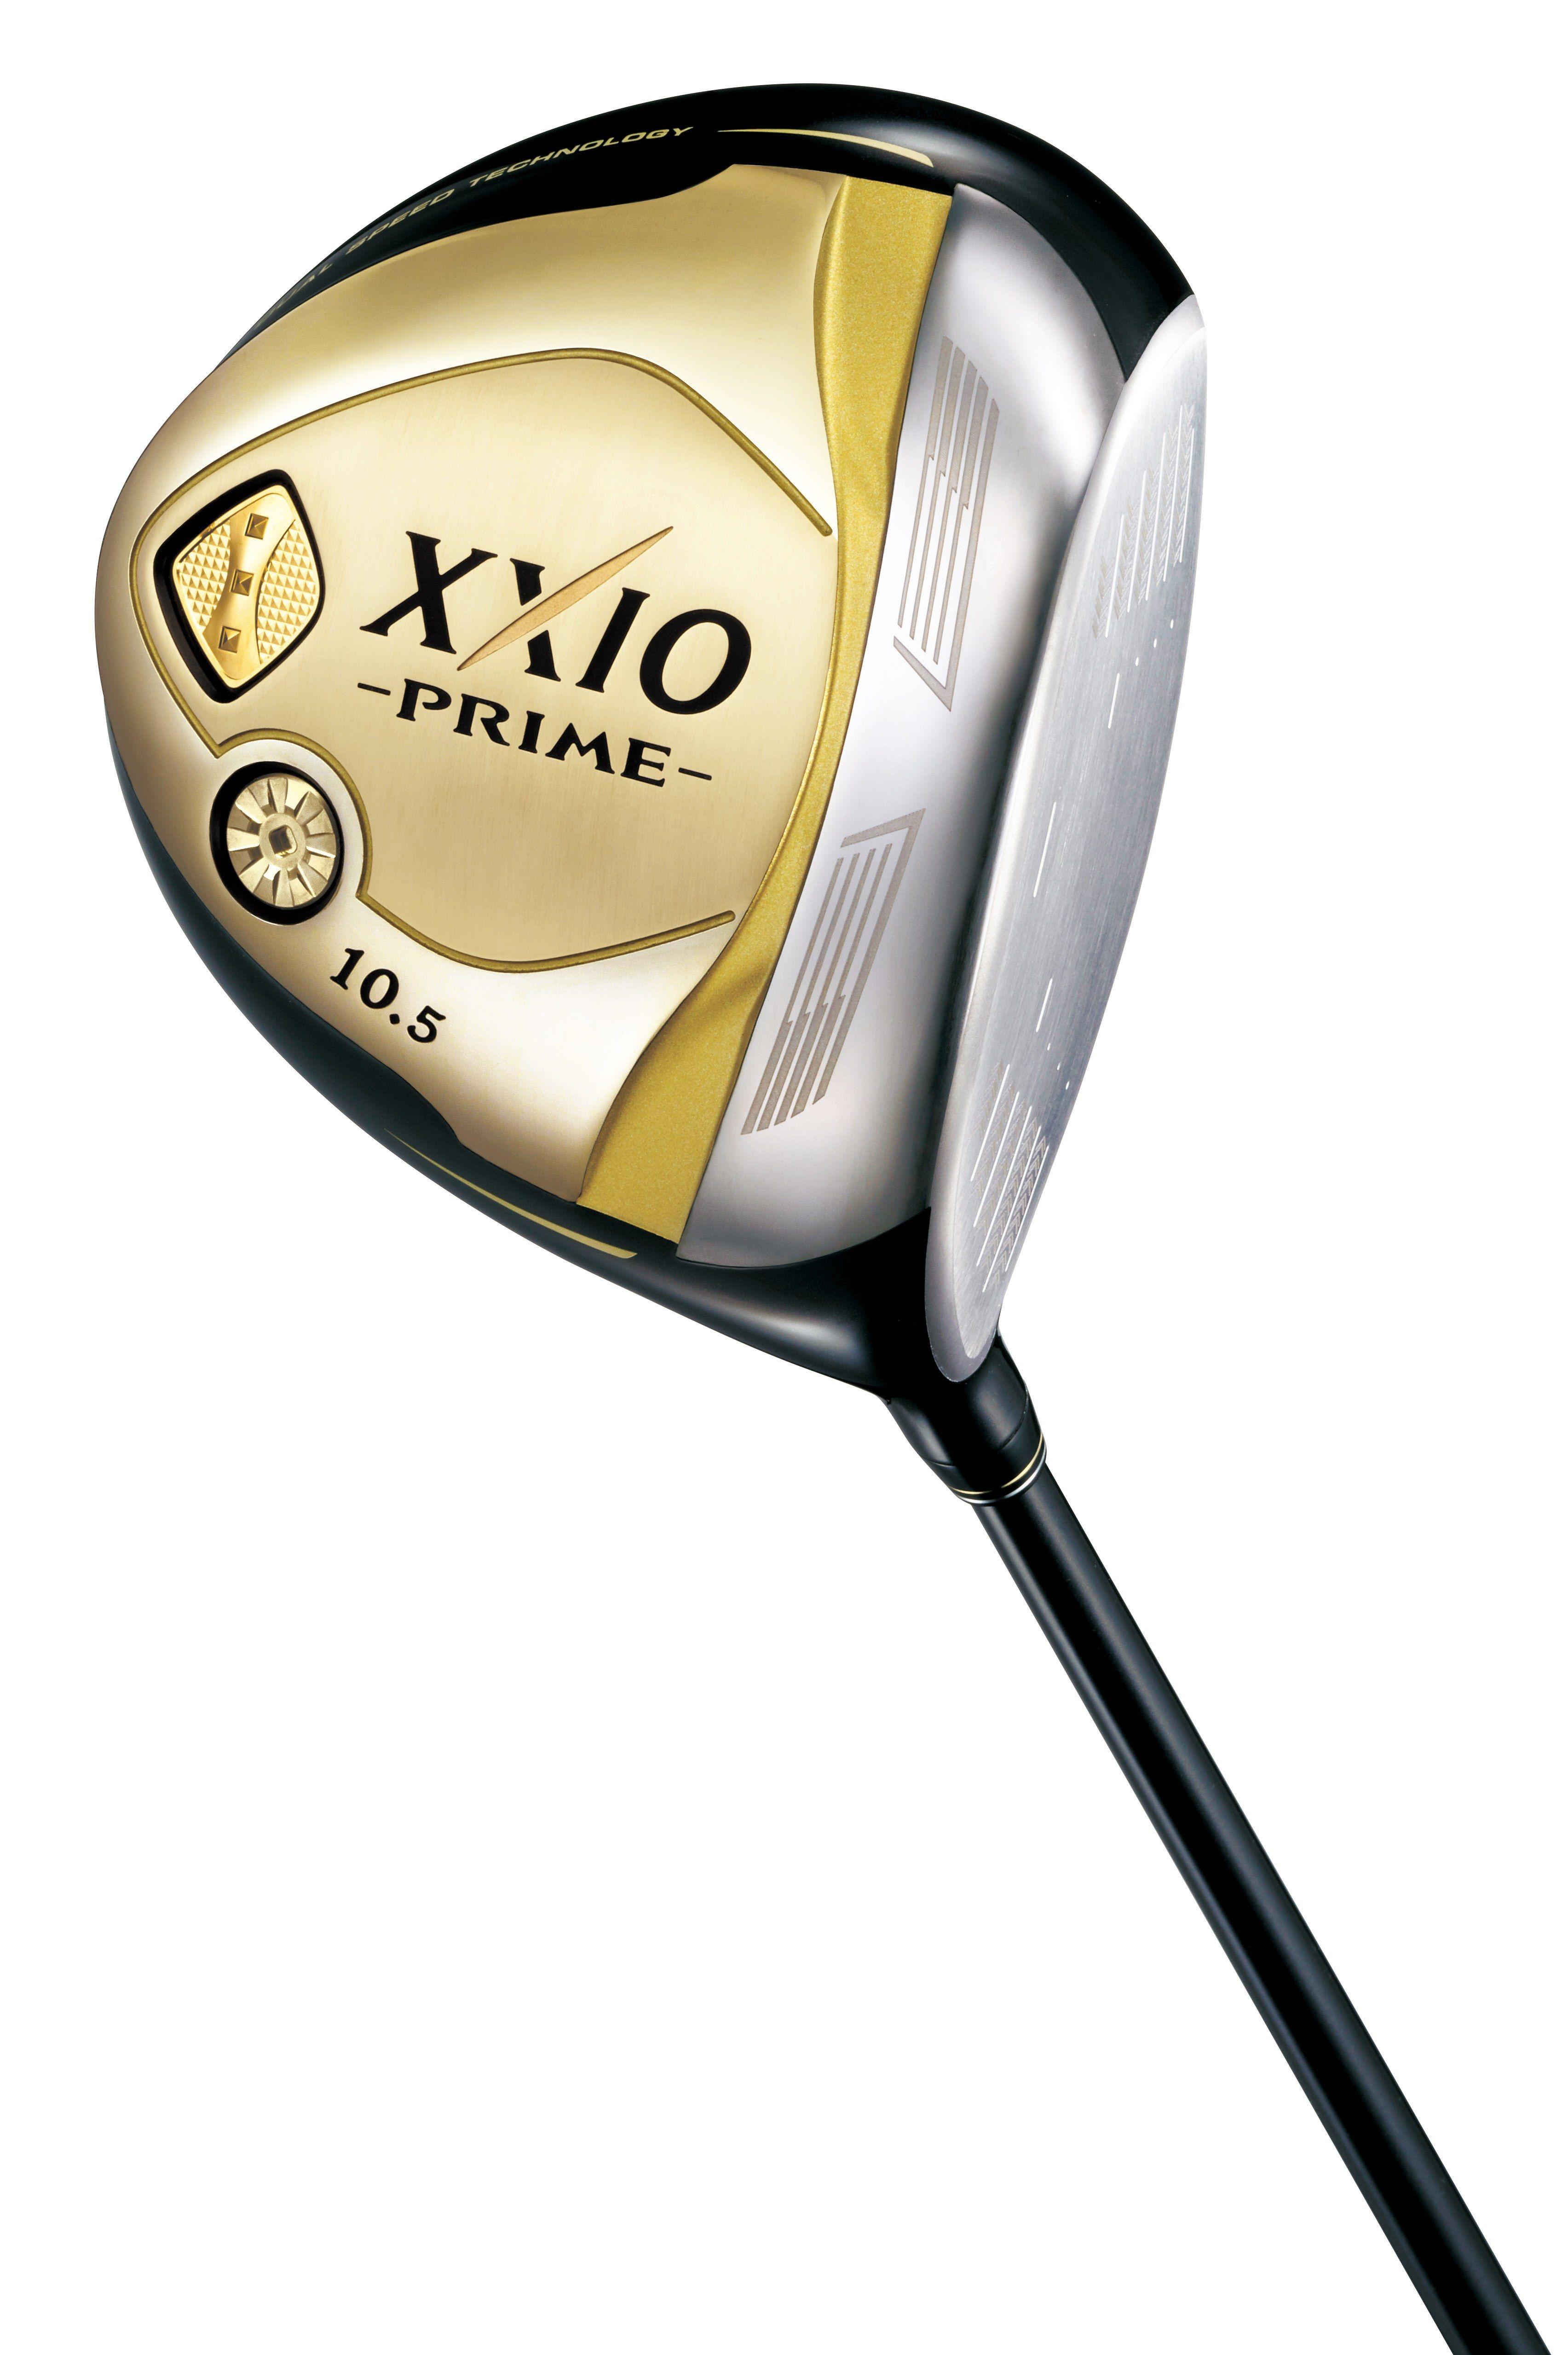 XXIO Golf Logo - XXIO pushes the extremes to help the average golfer swing faster